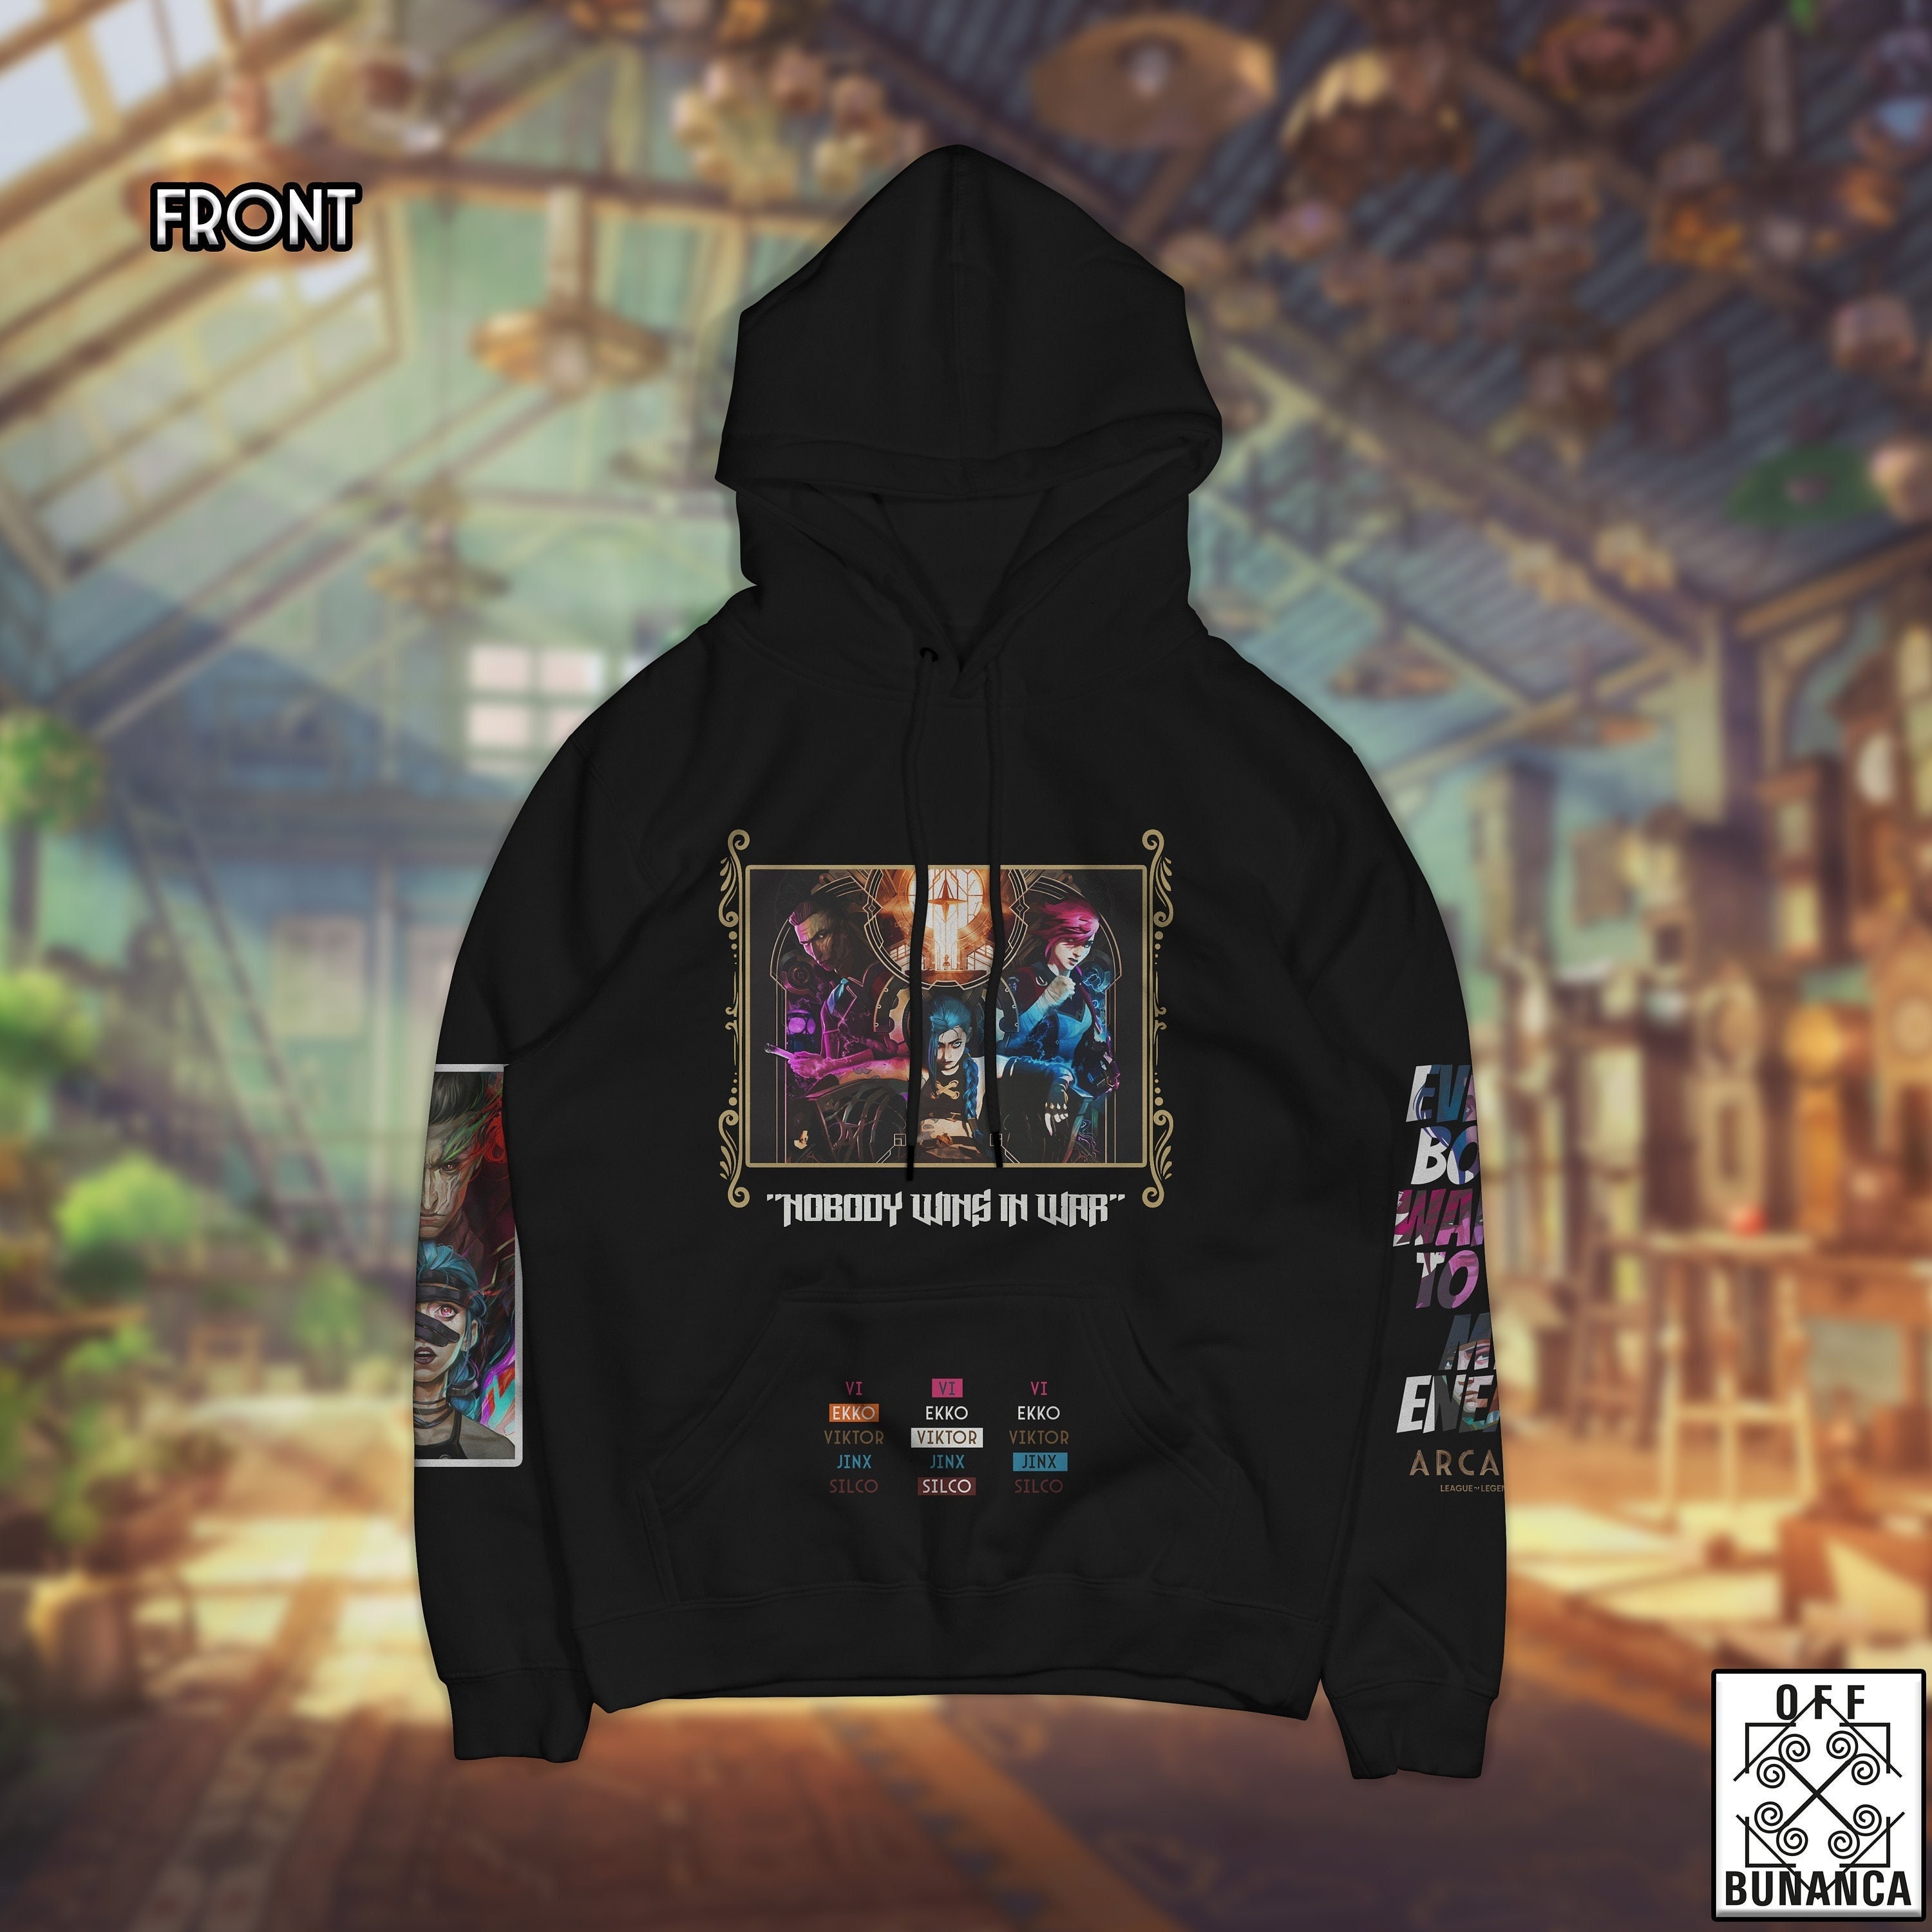 New Fashion Popular Cartoon Anime Arcane League of Legends 3D Printing  Hoodie Men and Women Street Trend Casual Long-sleeved Pullover